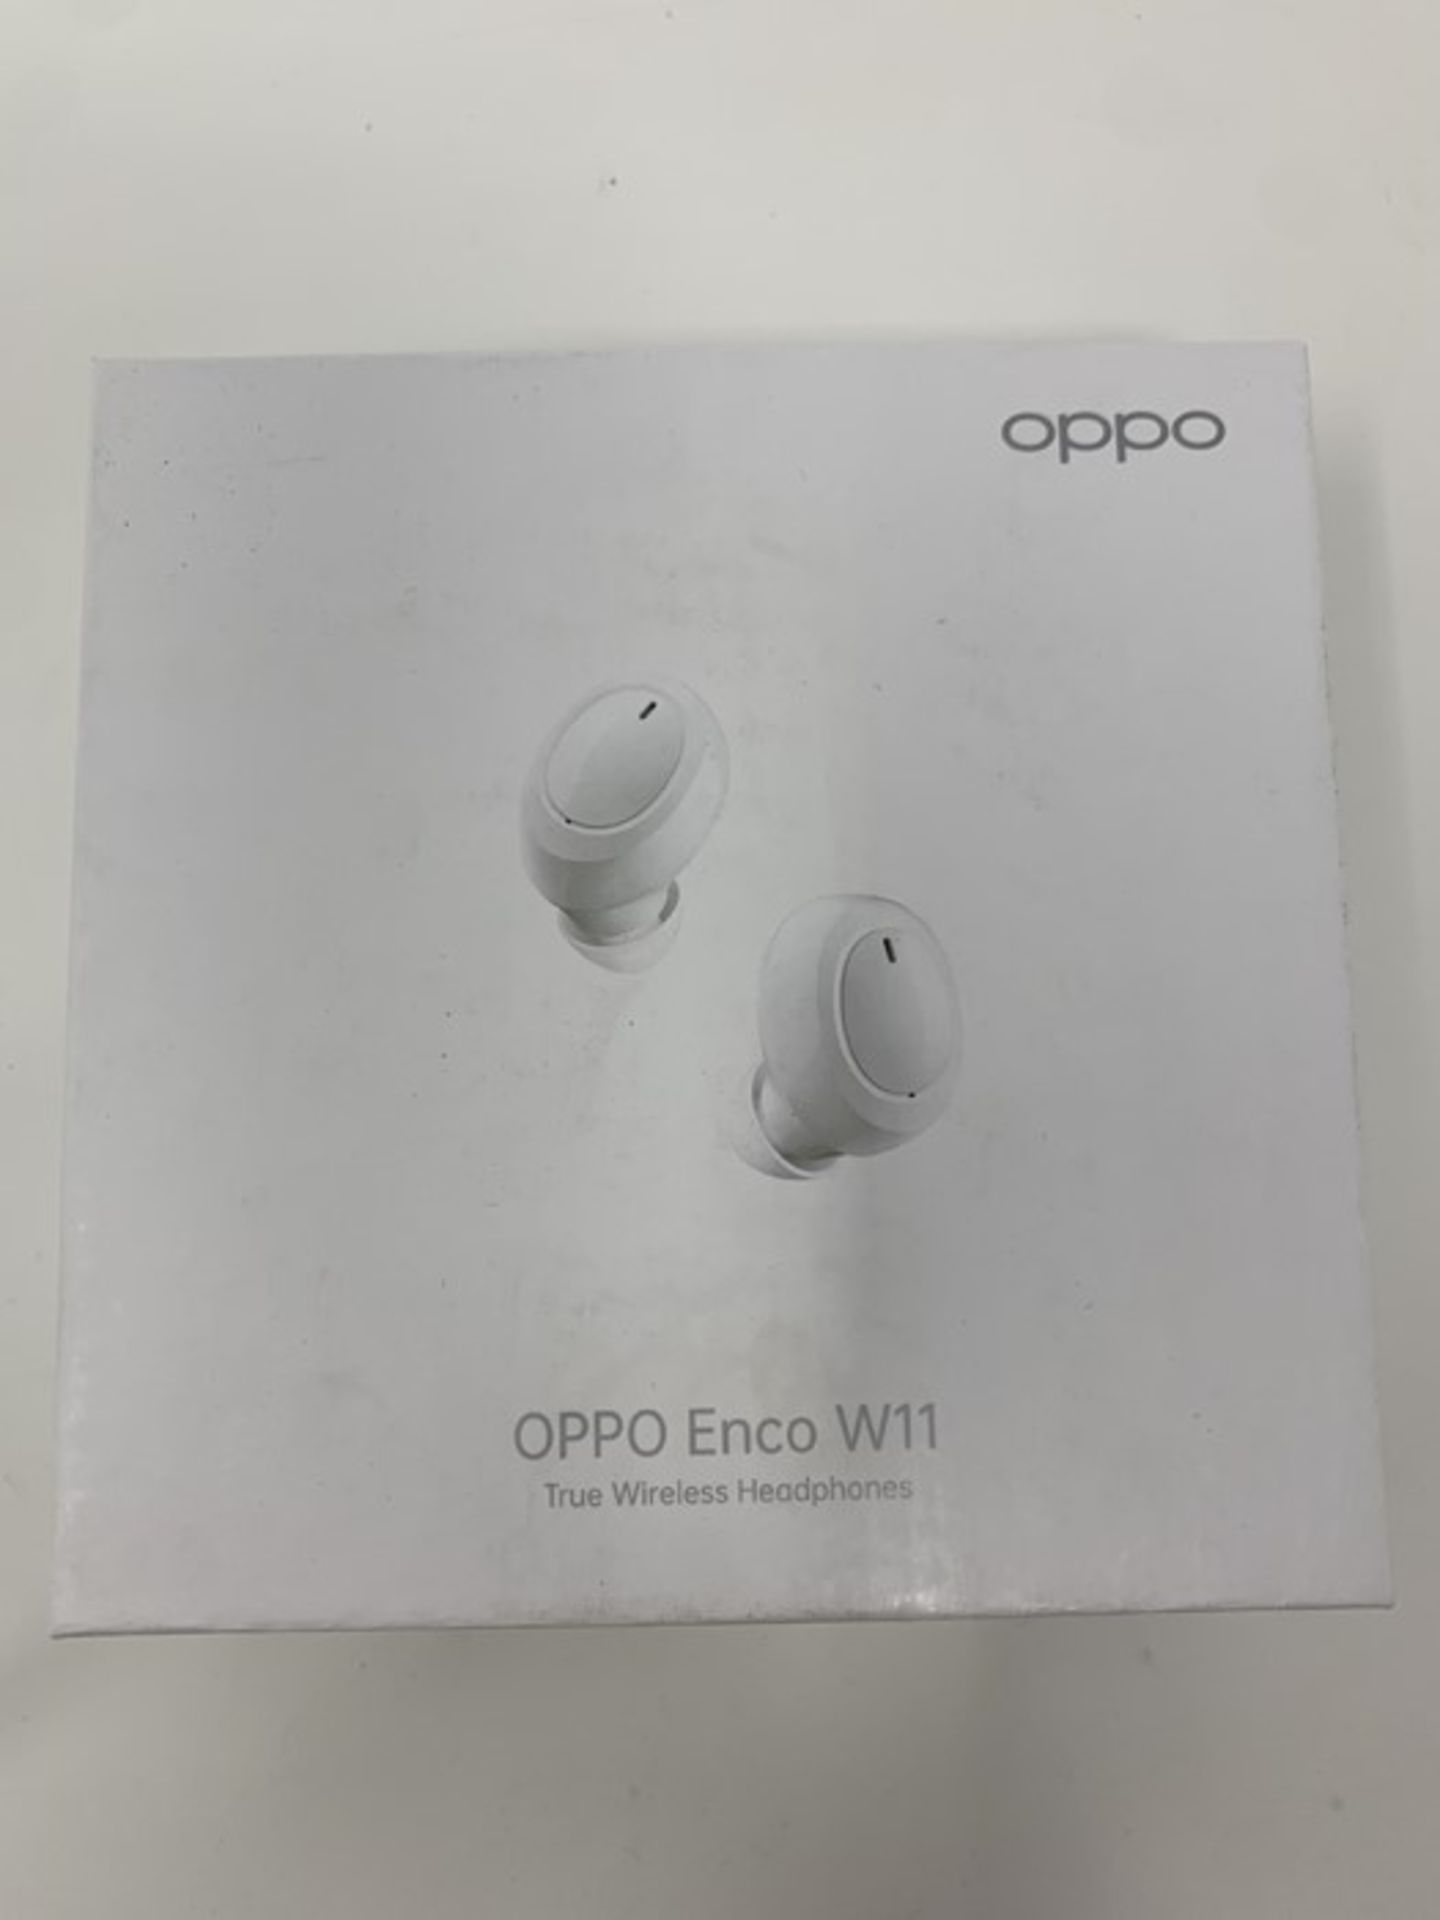 Oppo Enco W11 True Wireless Bluetooth Headphones In-Ear Earbuds Noise Cancellation During Calls - Image 2 of 2